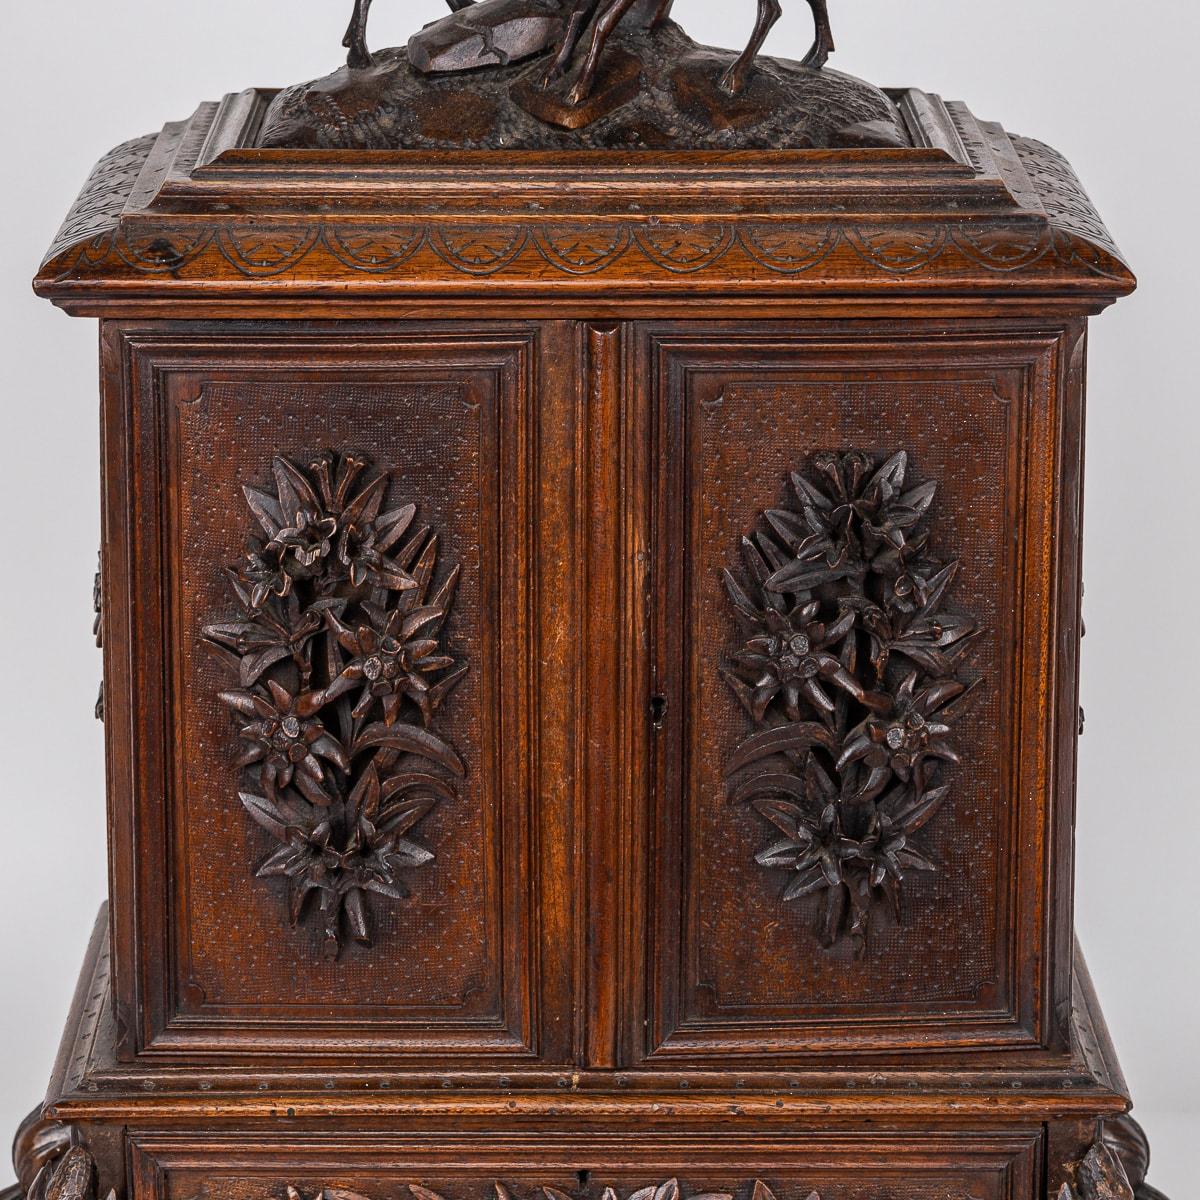 Antique 19th Century German Black Forest Fruitwood Humidor c.1890 For Sale 8